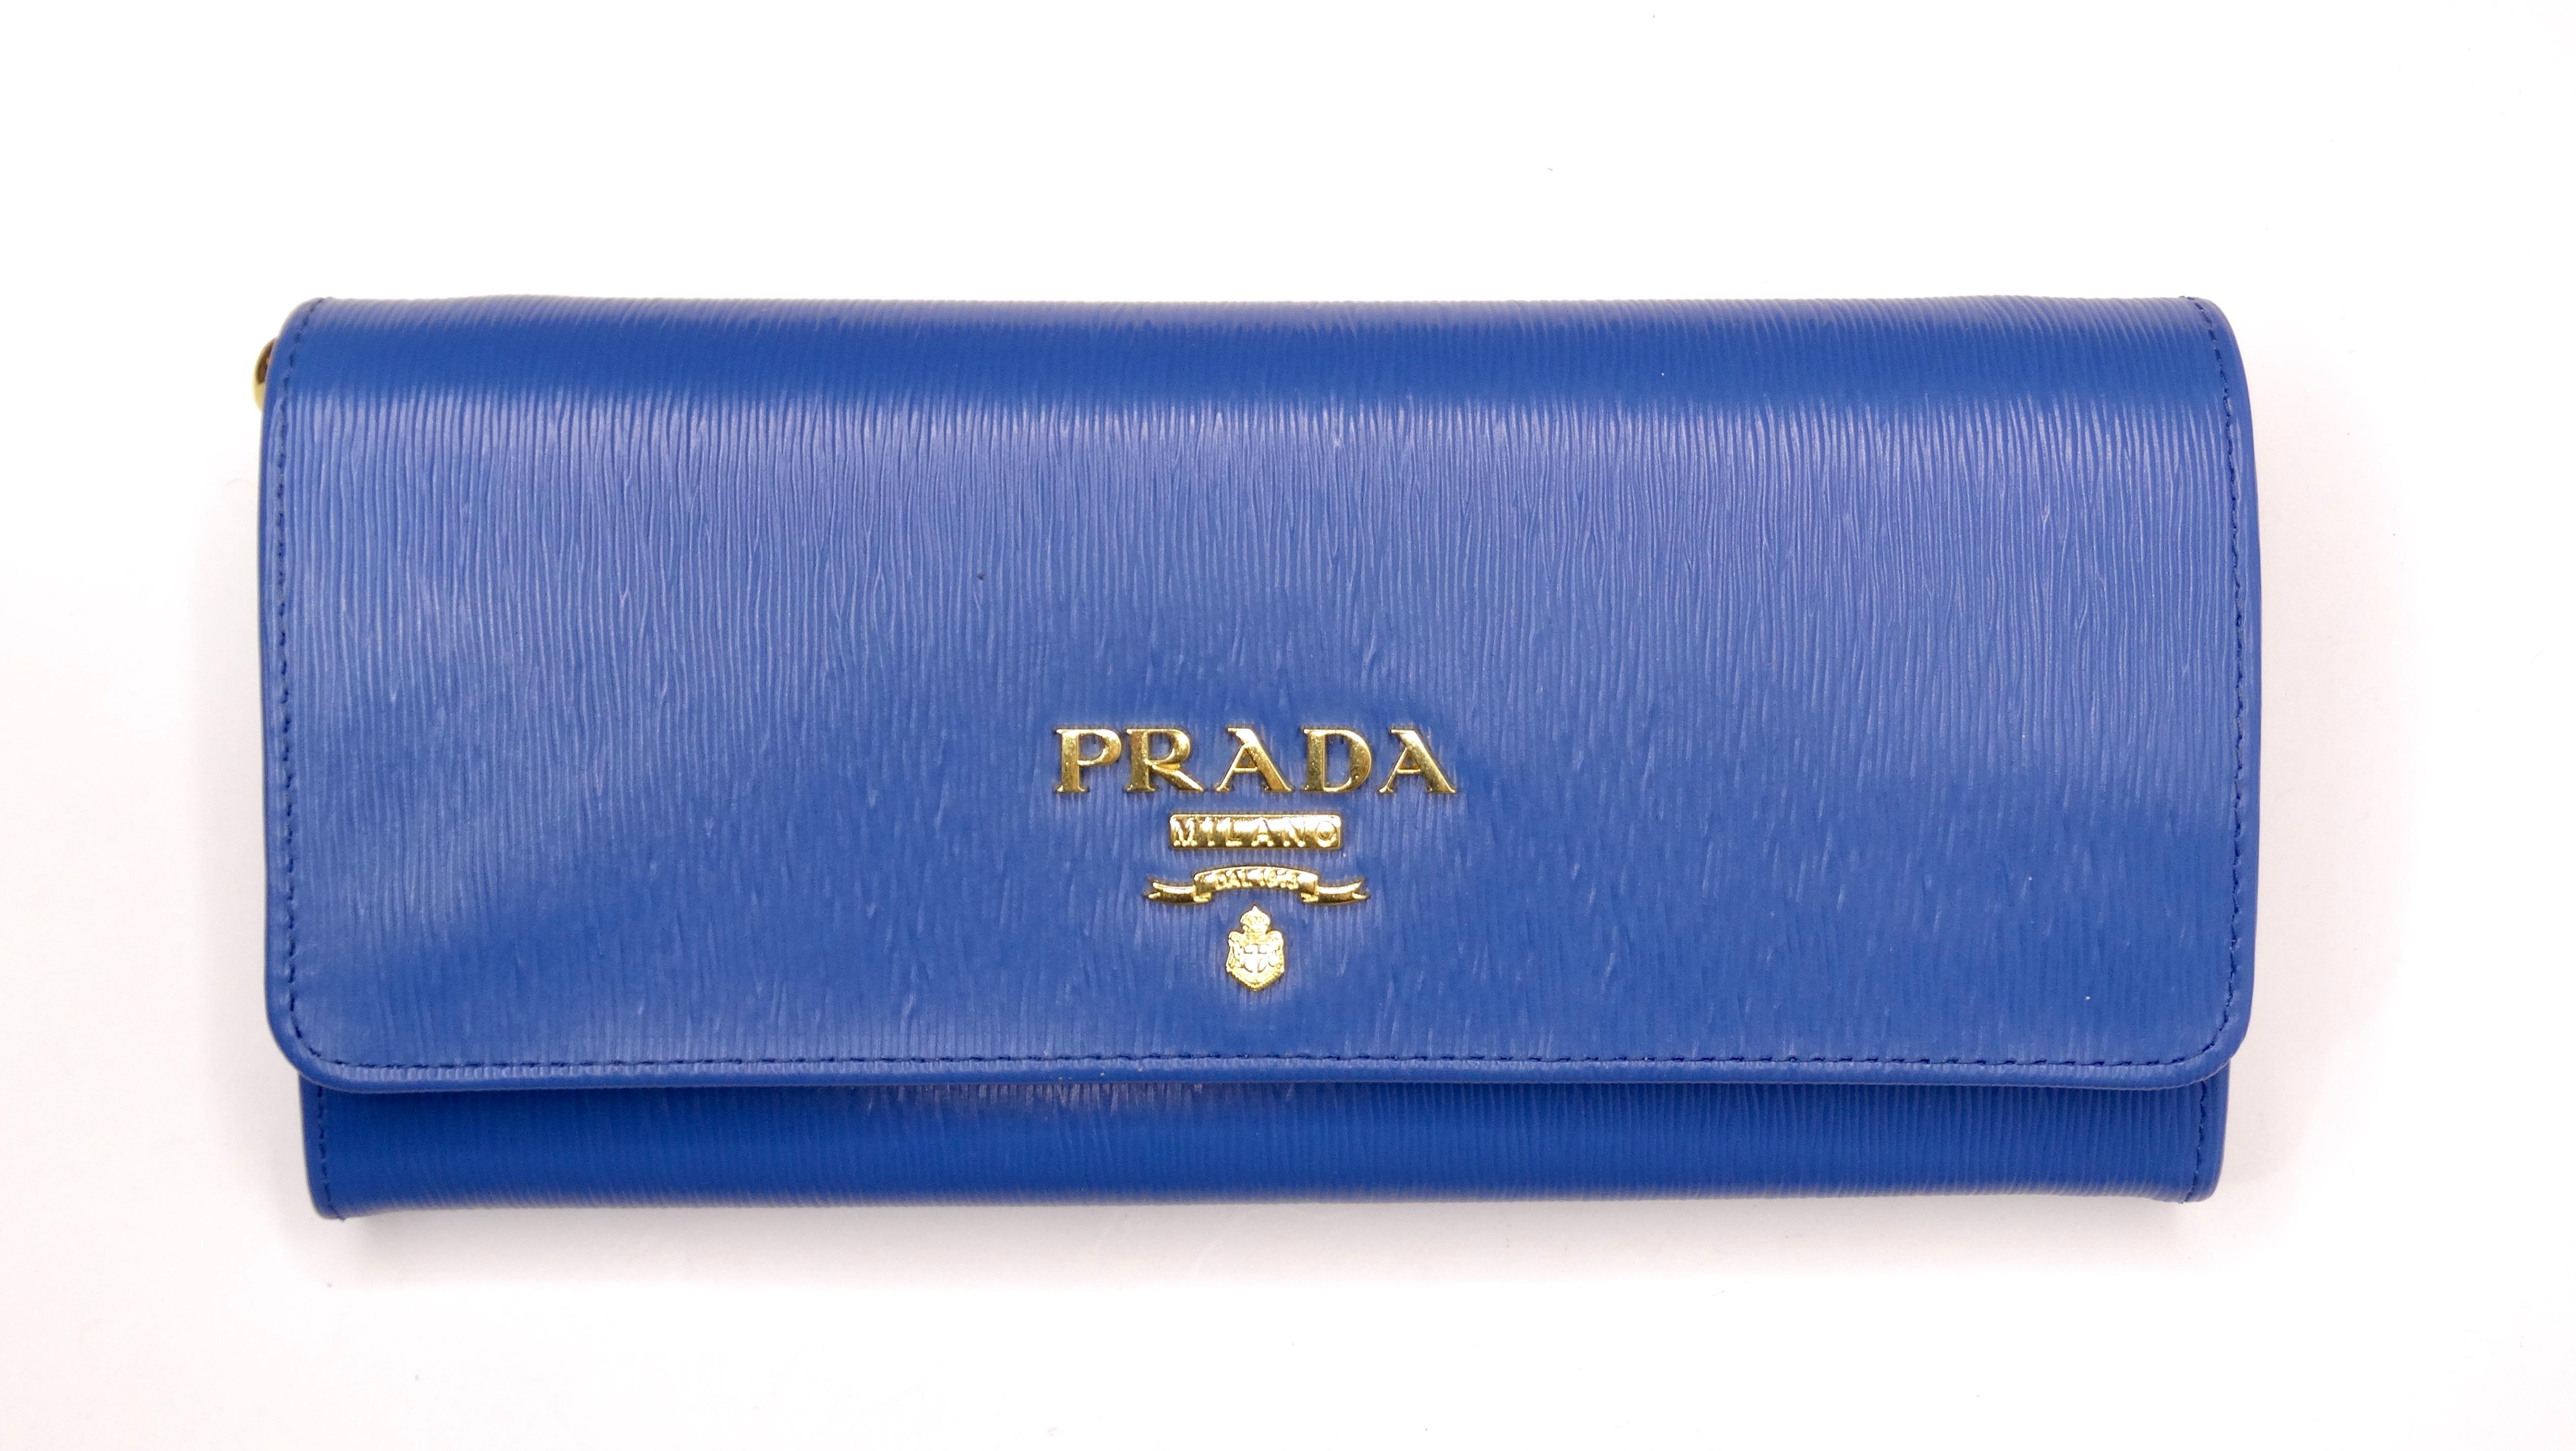 Snag this Prada wallet on a chain today in the most beautiful color! This color is bound to make you happy when wearing it! These style of bags are ultra-versatile as it can be taken through your day of errands or dressed up for a night-look. Use it